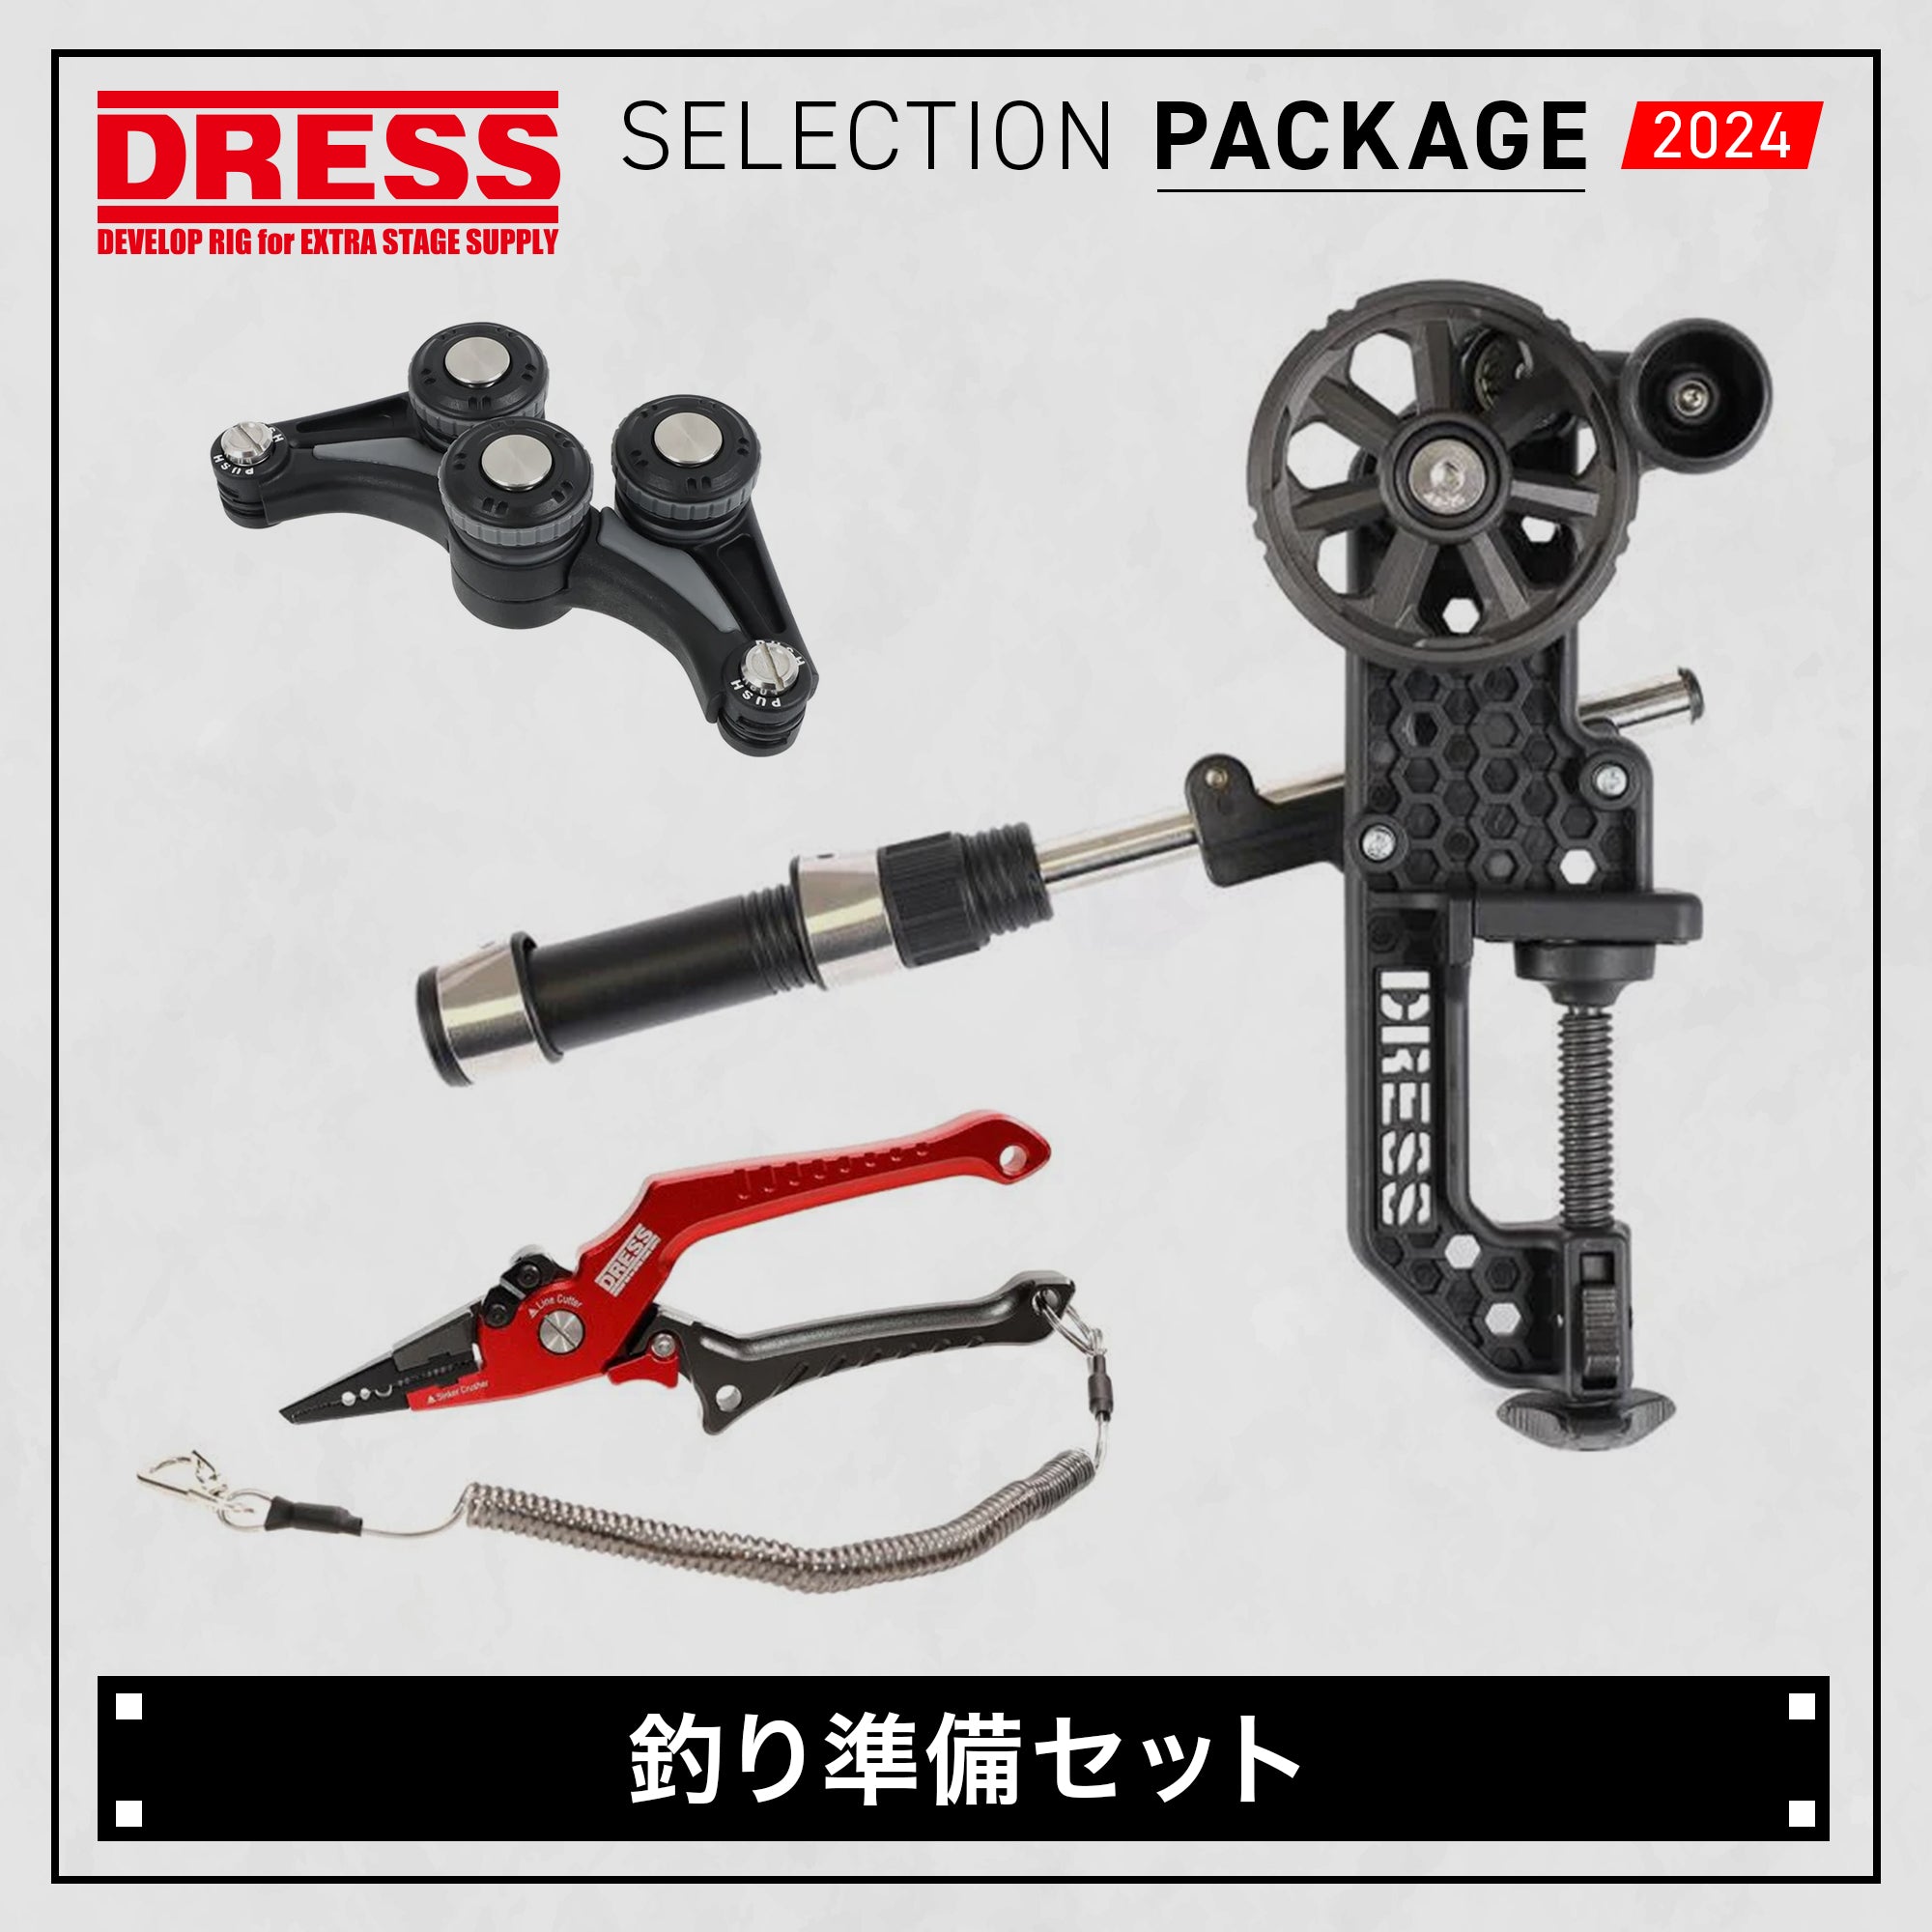 SELECTION PACKAGE 2024】釣り準備セット